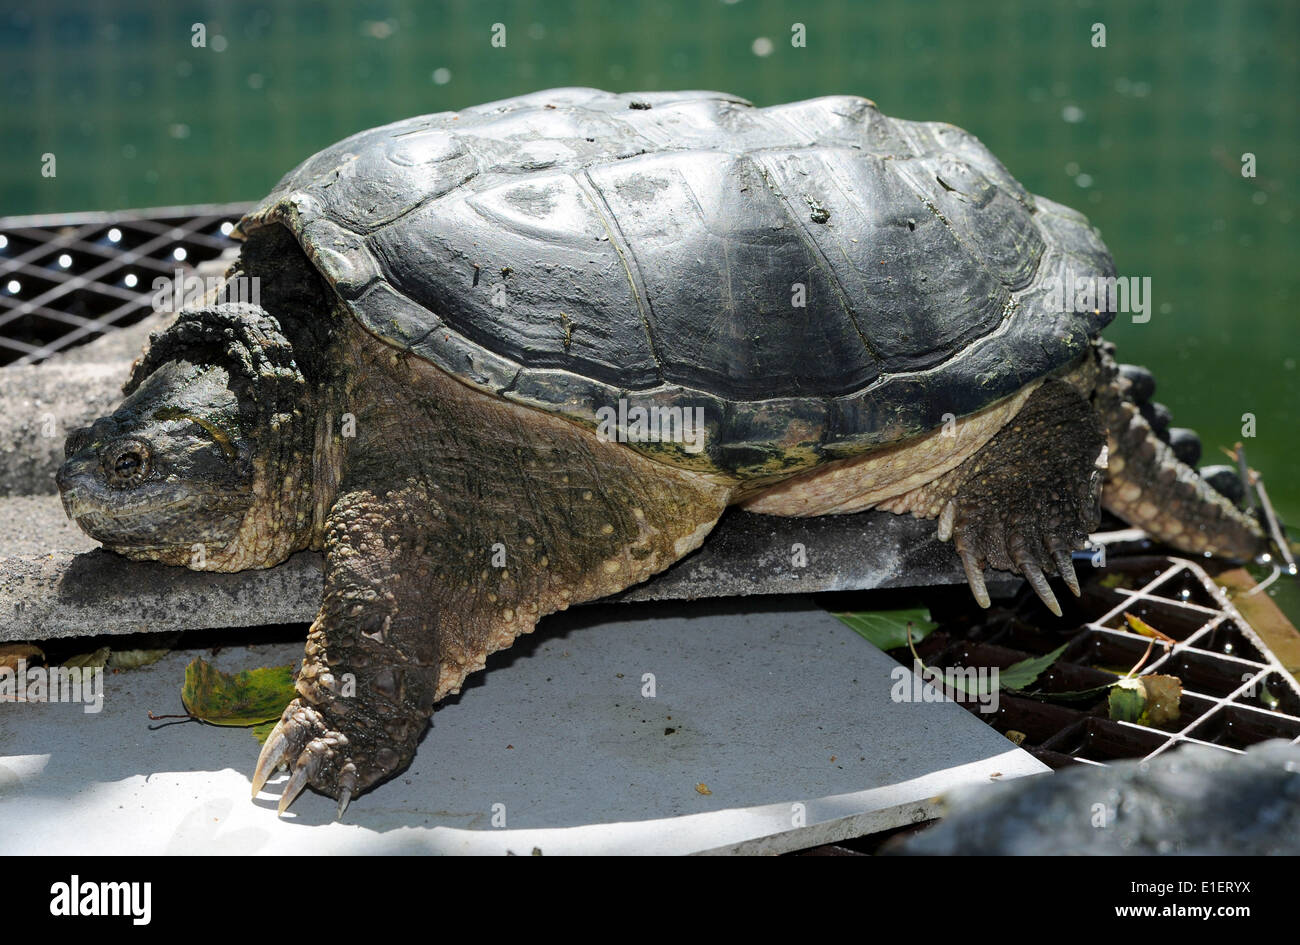 Rastede, Germany. 30th May, 2014. A snapping turtle from the USA sits in its enclosure at the wildlife rescue centre in Rastede, Germany, 30 May 2014. The animal can be rather dangerous and is not going to be re-released into the wild. Spring is a very busy time for the wildlife rescue centre. Photo: Ingo Wagner/dpa/Alamy Live News Stock Photo